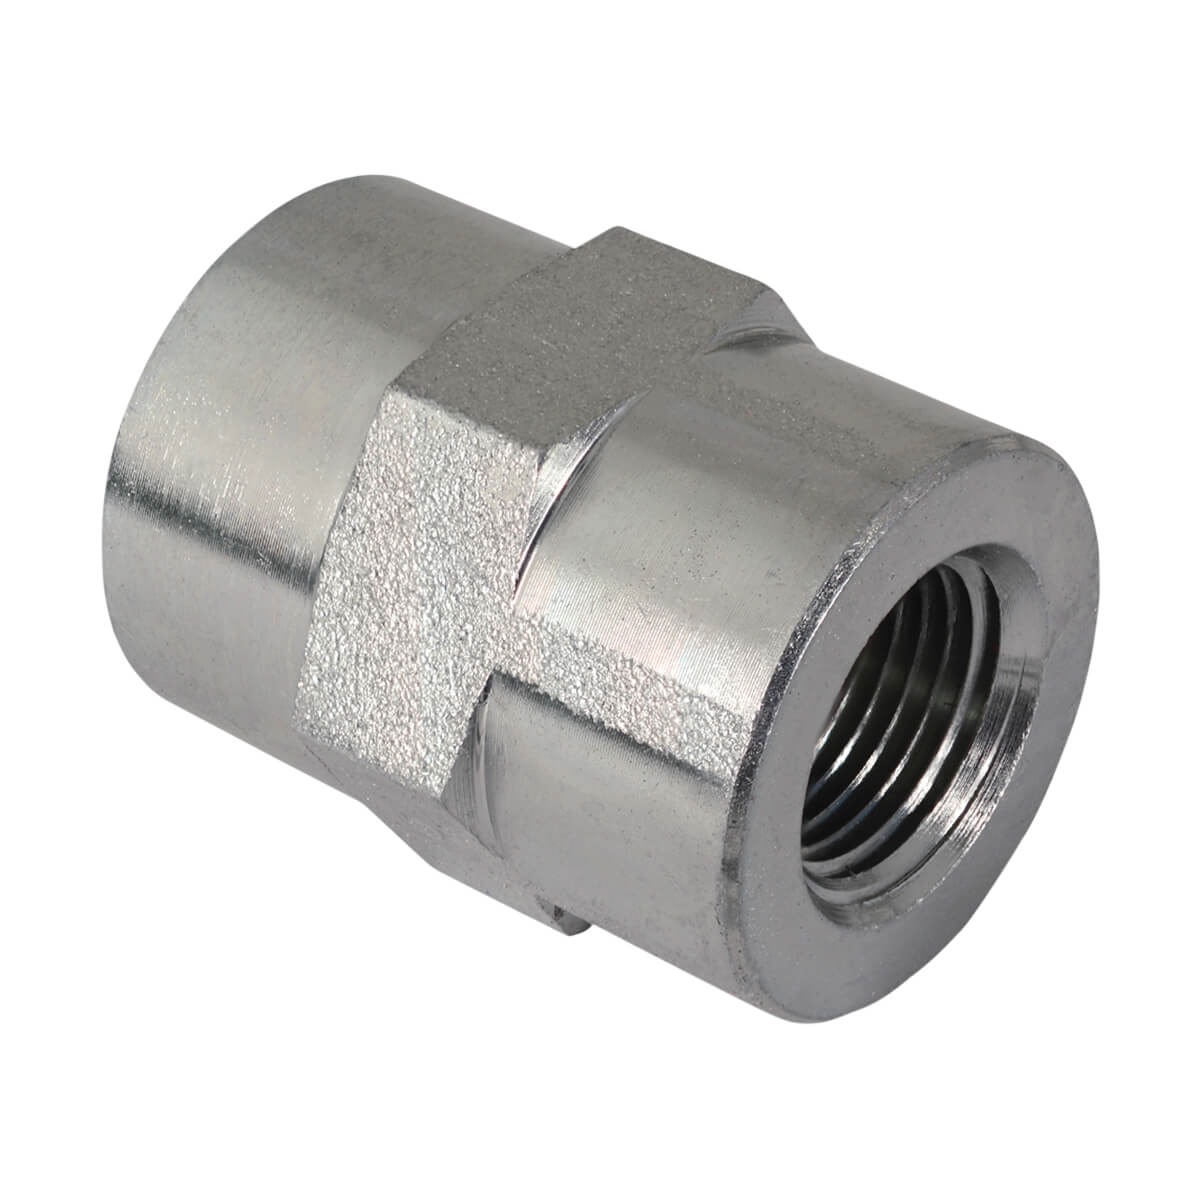 Female Pipe Thread Hydraulic Adapter - 1/2-in FPT x 1/2-in